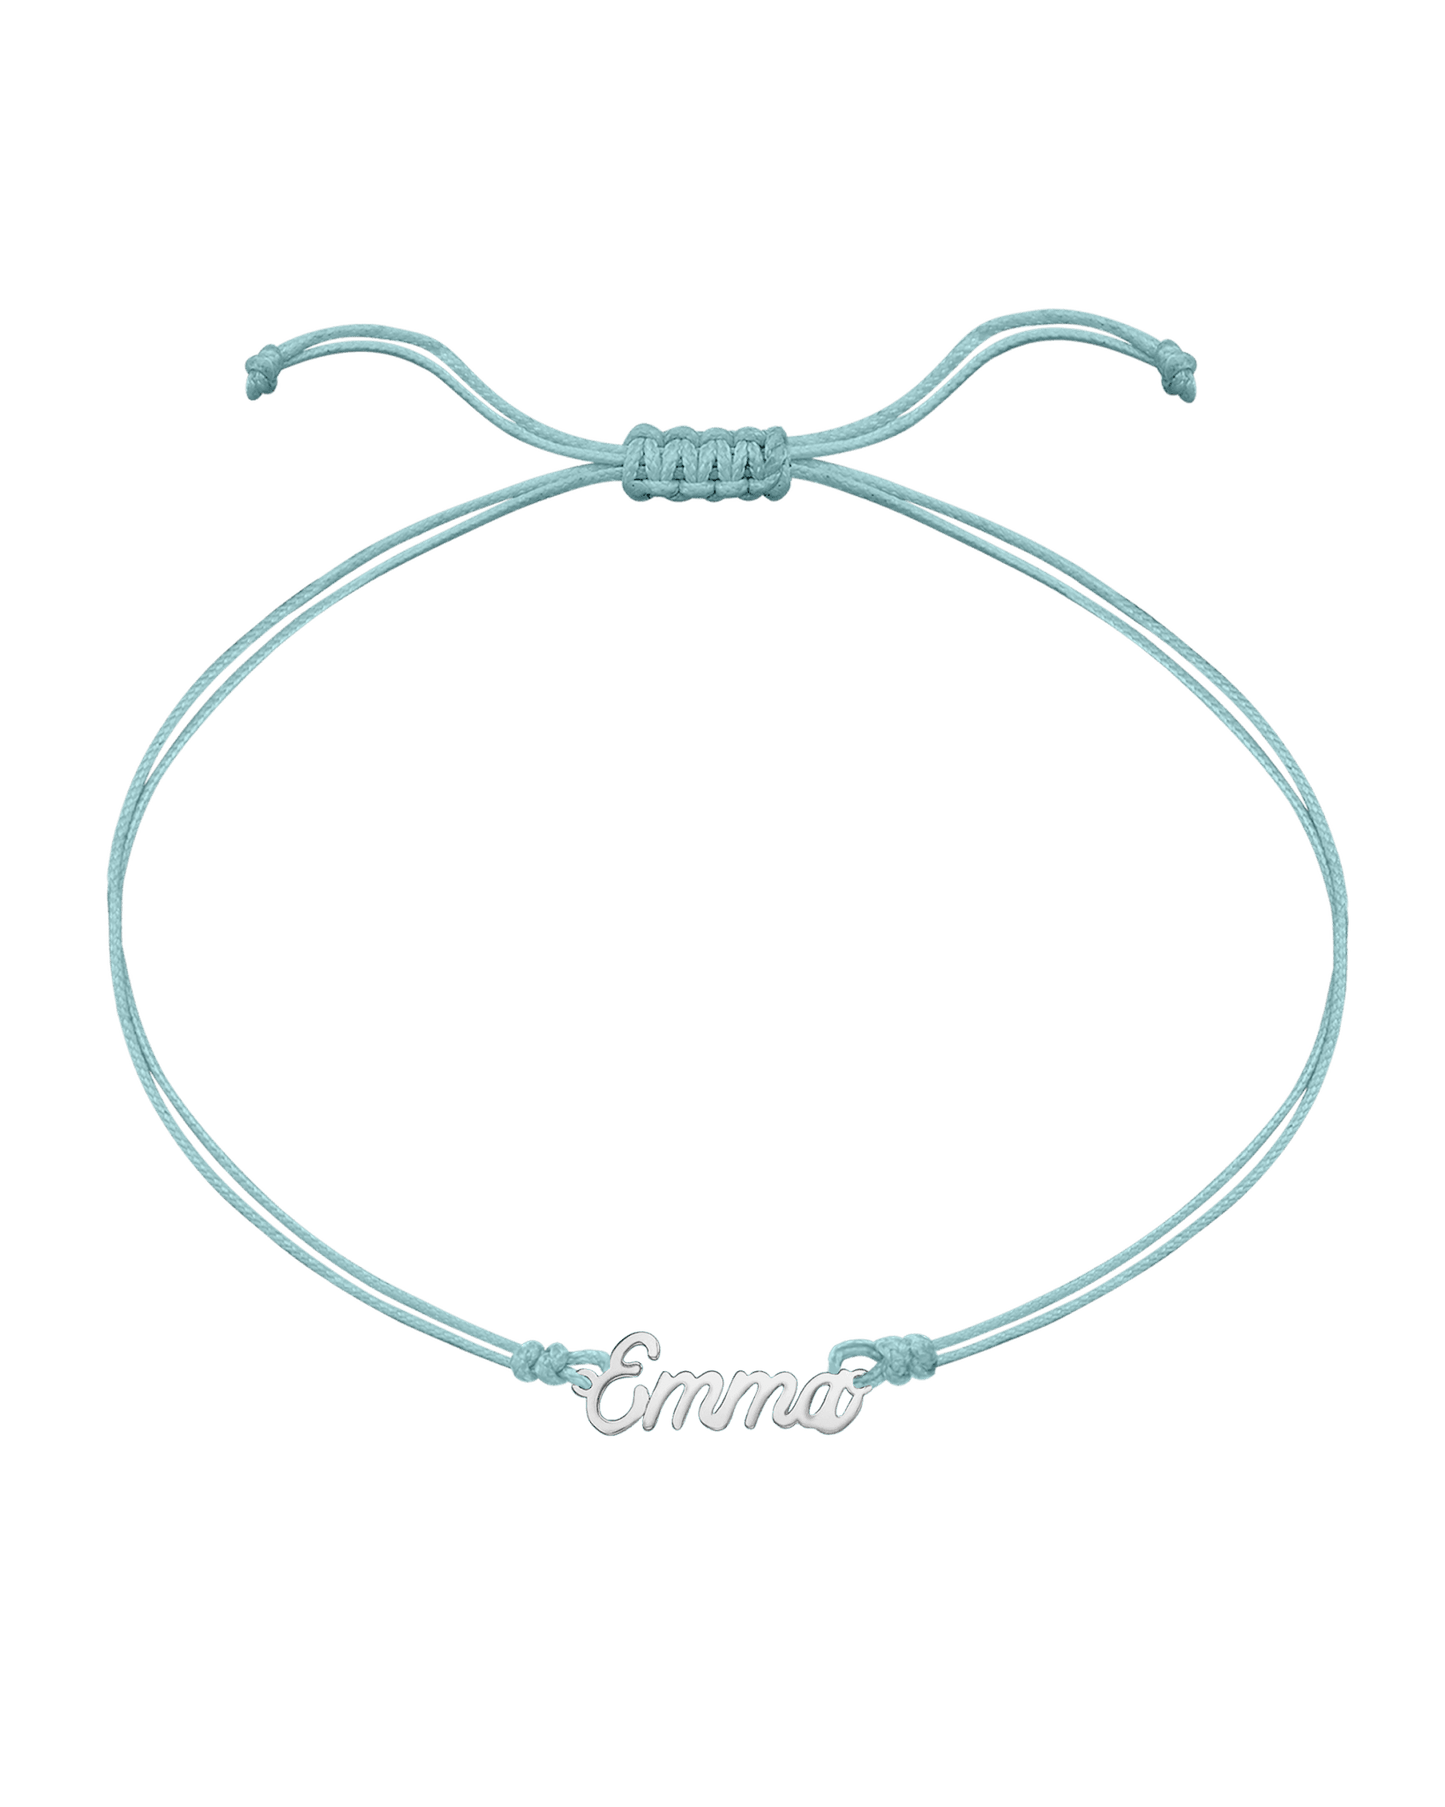 Name Plate String of Love - 14K White Gold Bracelets 14K Solid Gold Turquoise 1 